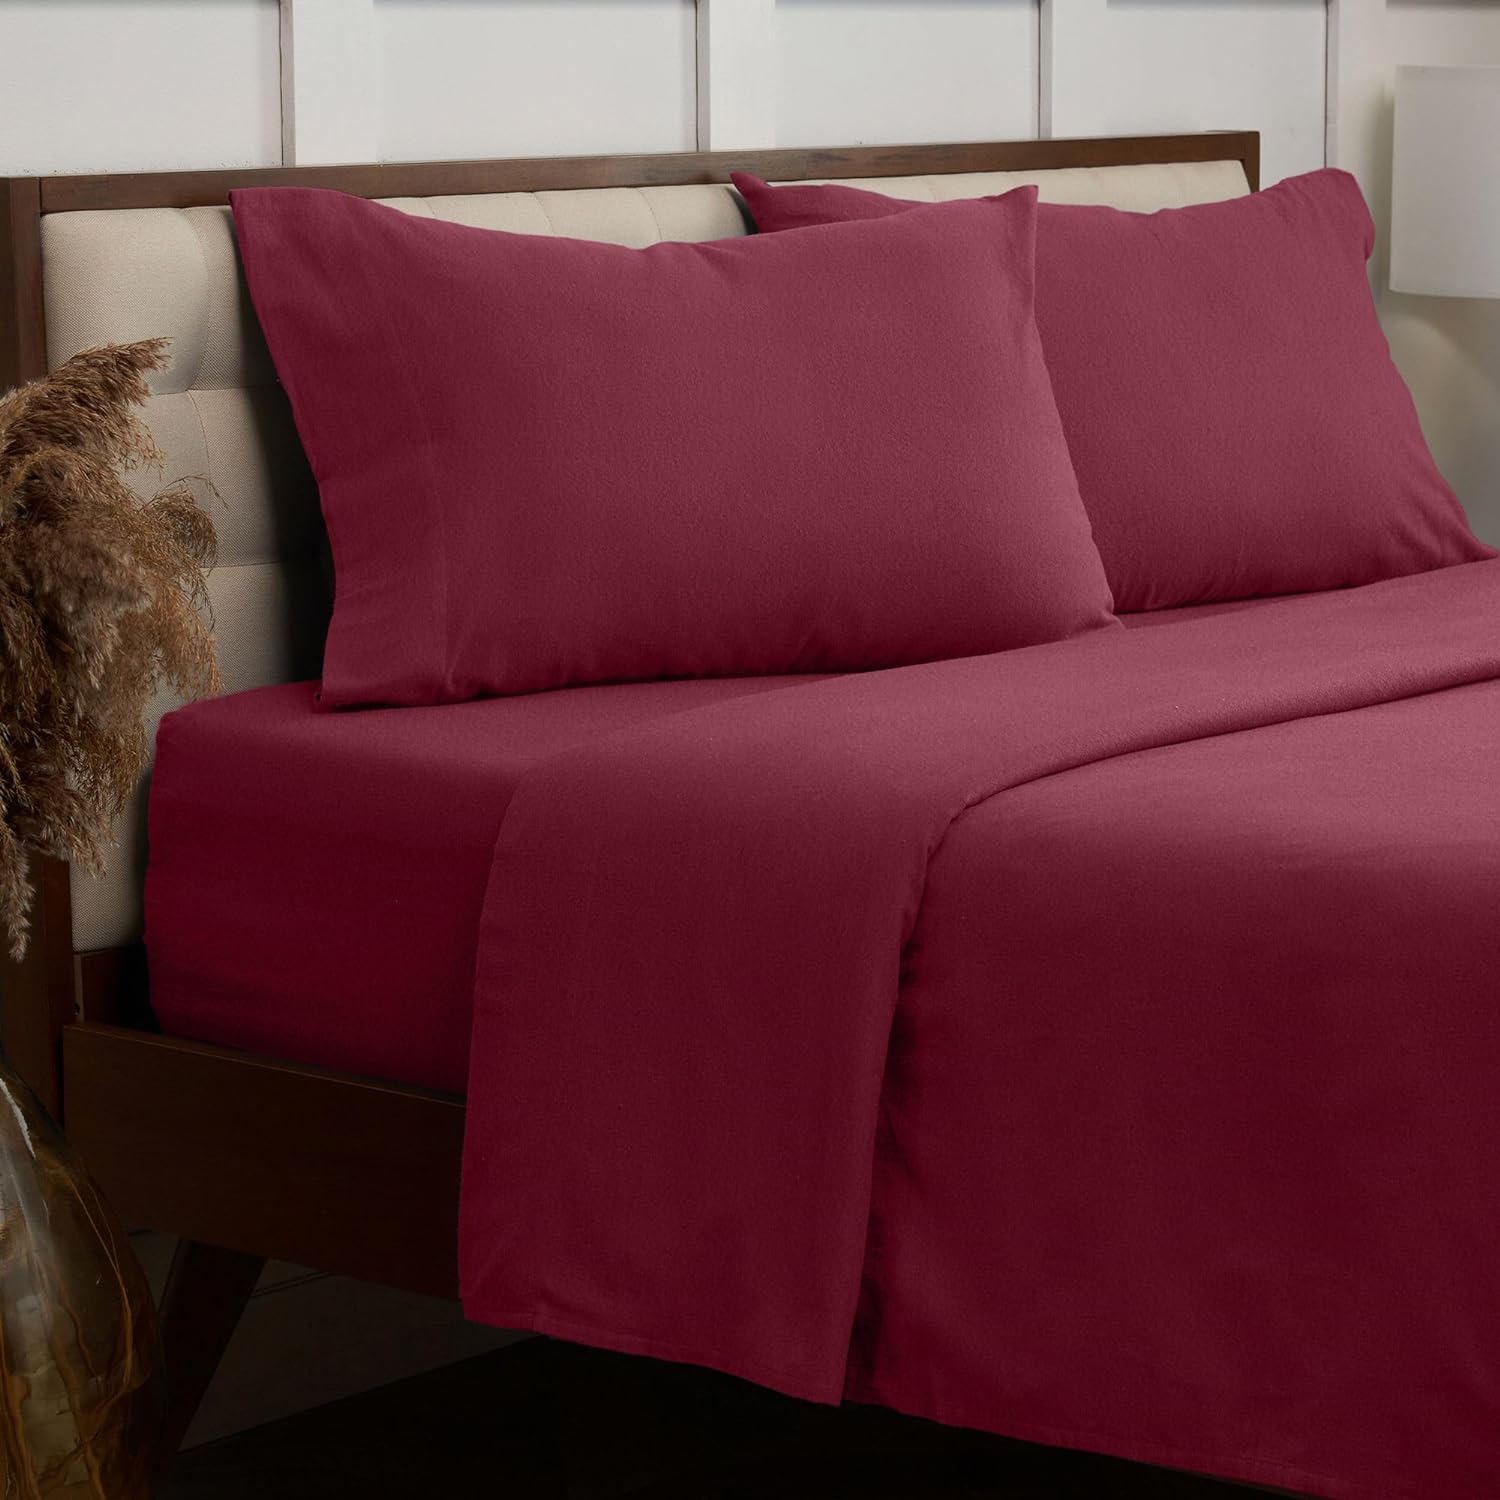 Mellanni Cotton Flannel Queen Sheets Set - Double Brushed for Extra Softness & Comfort - Luxury Lightweight Burgundy Sheets Set - Deep Pocket Fitted Sheet up to 16 inch - 4 PC Set (Queen, Burgundy) 